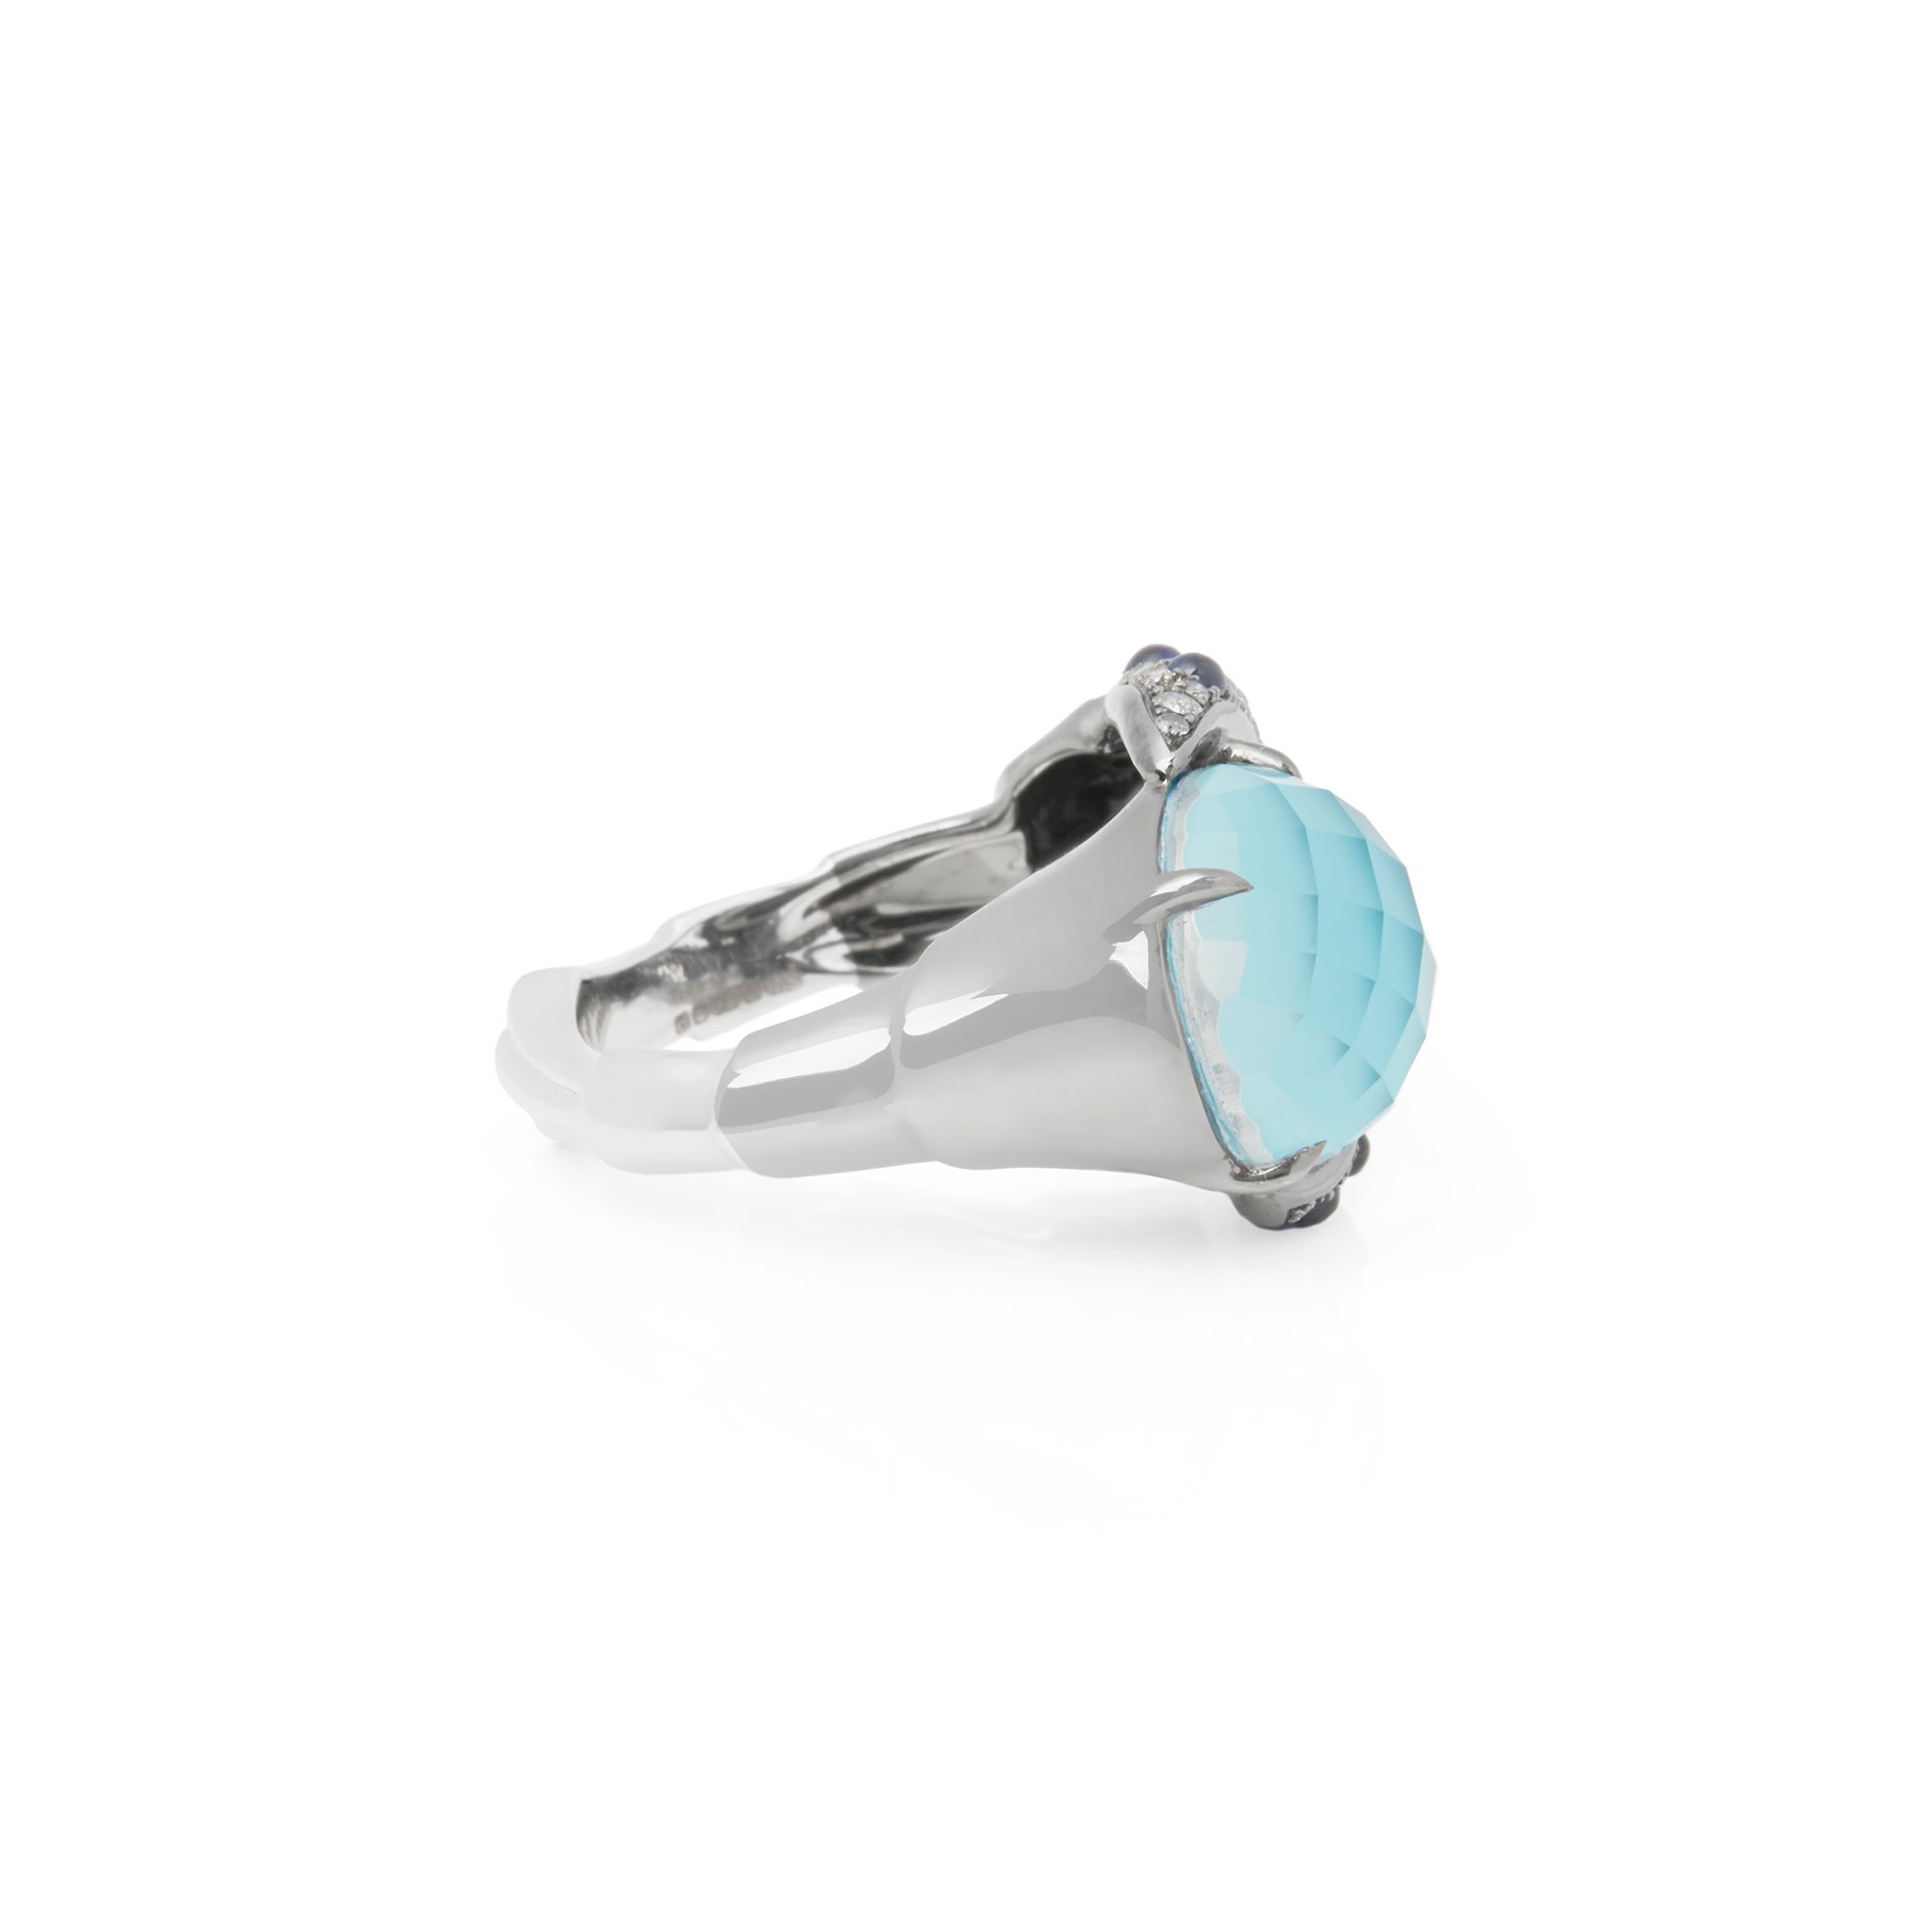 Stephen Webster Jewels Verne Turquoise and Blue Sapphire Ring